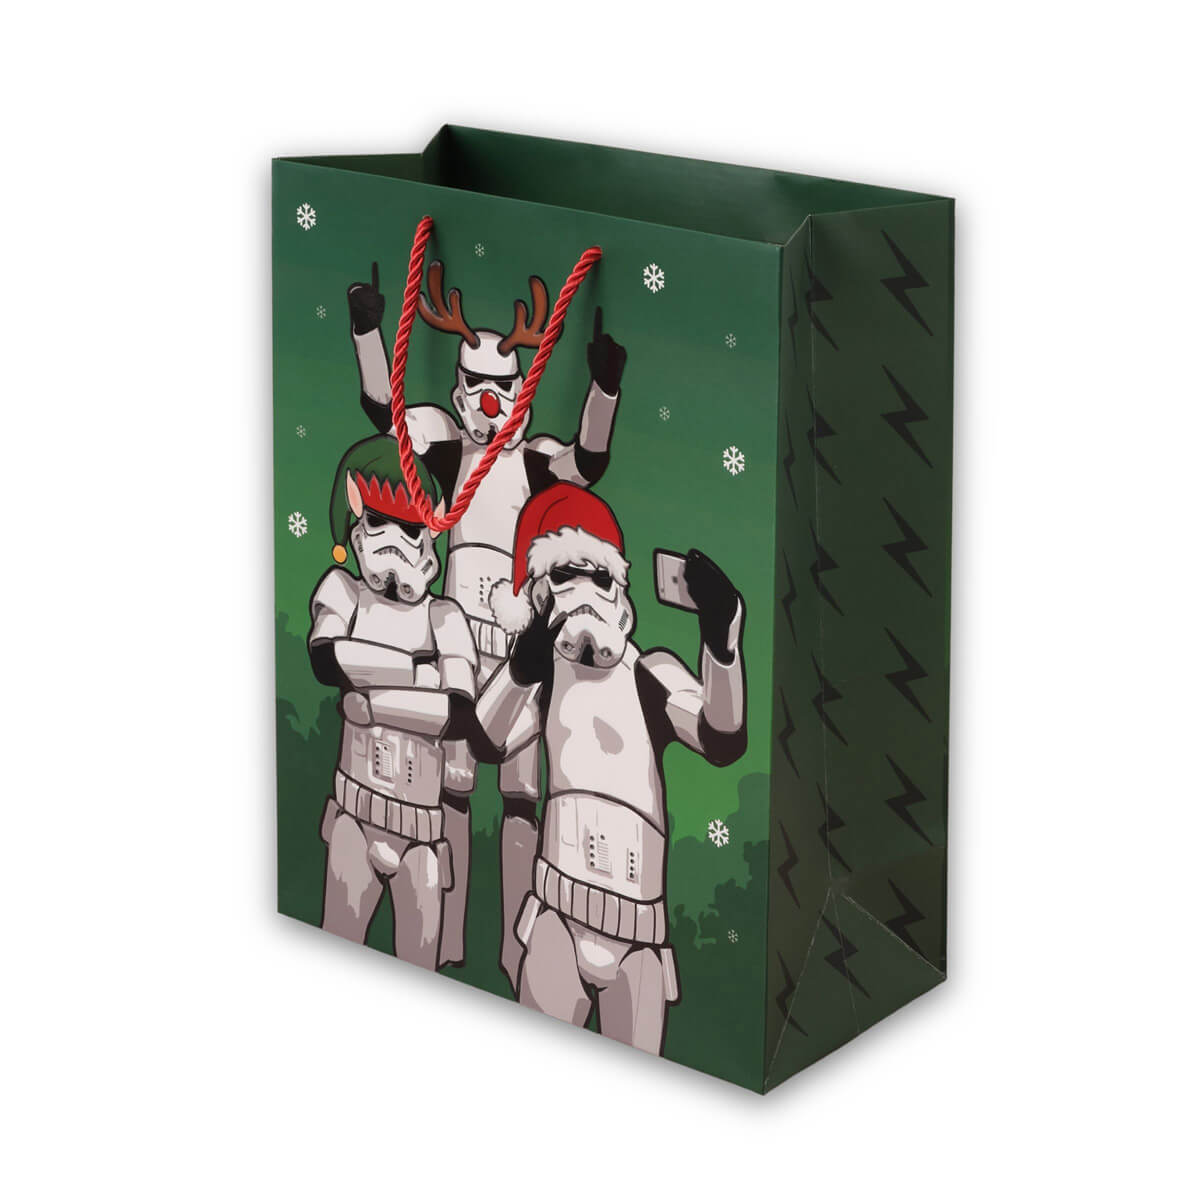 Original Stormtrooper Christmas Gift Bag - Large size - close up image of green gift bag with stormtroopers taking a selfie with santa hats on